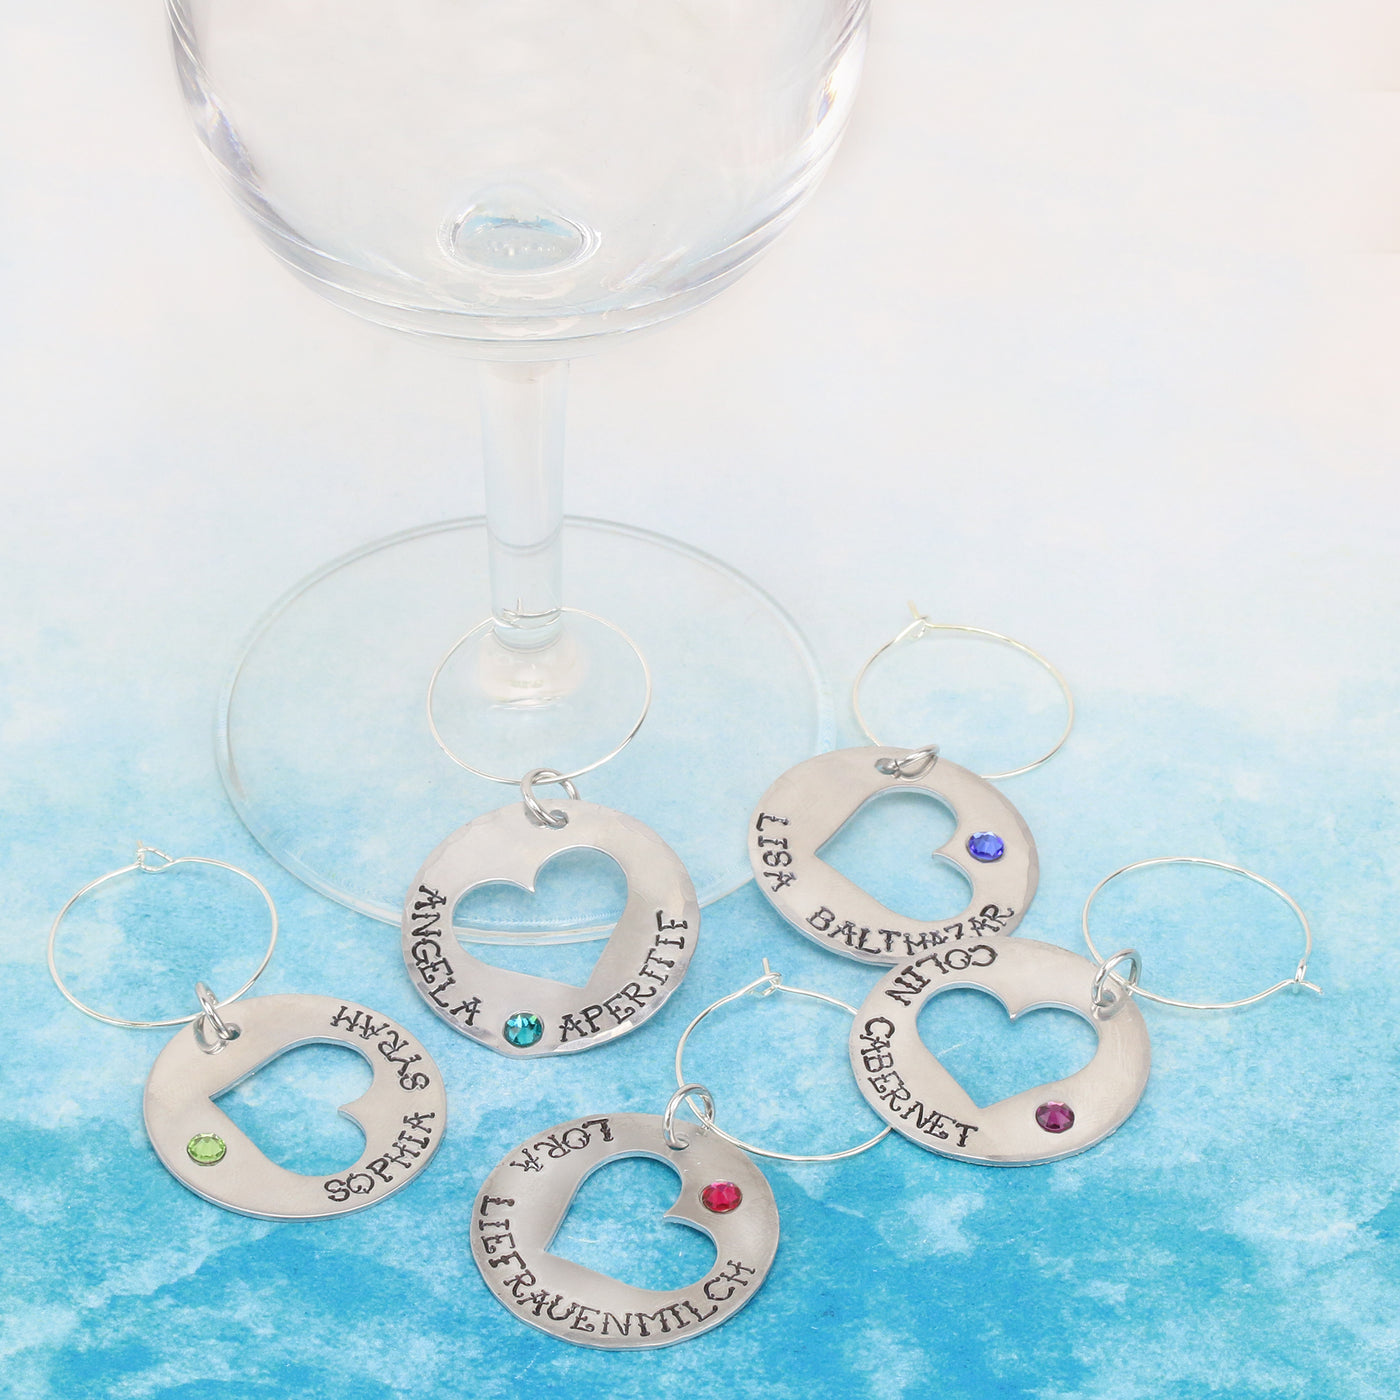 25 OR 50 Silver Tone Wine Glass Charm Rings DIY Craft Make Sweet Gift 4  Holiday 25mm Add Colorful Beads Charms Bottle Caps Bottlecap -  Denmark